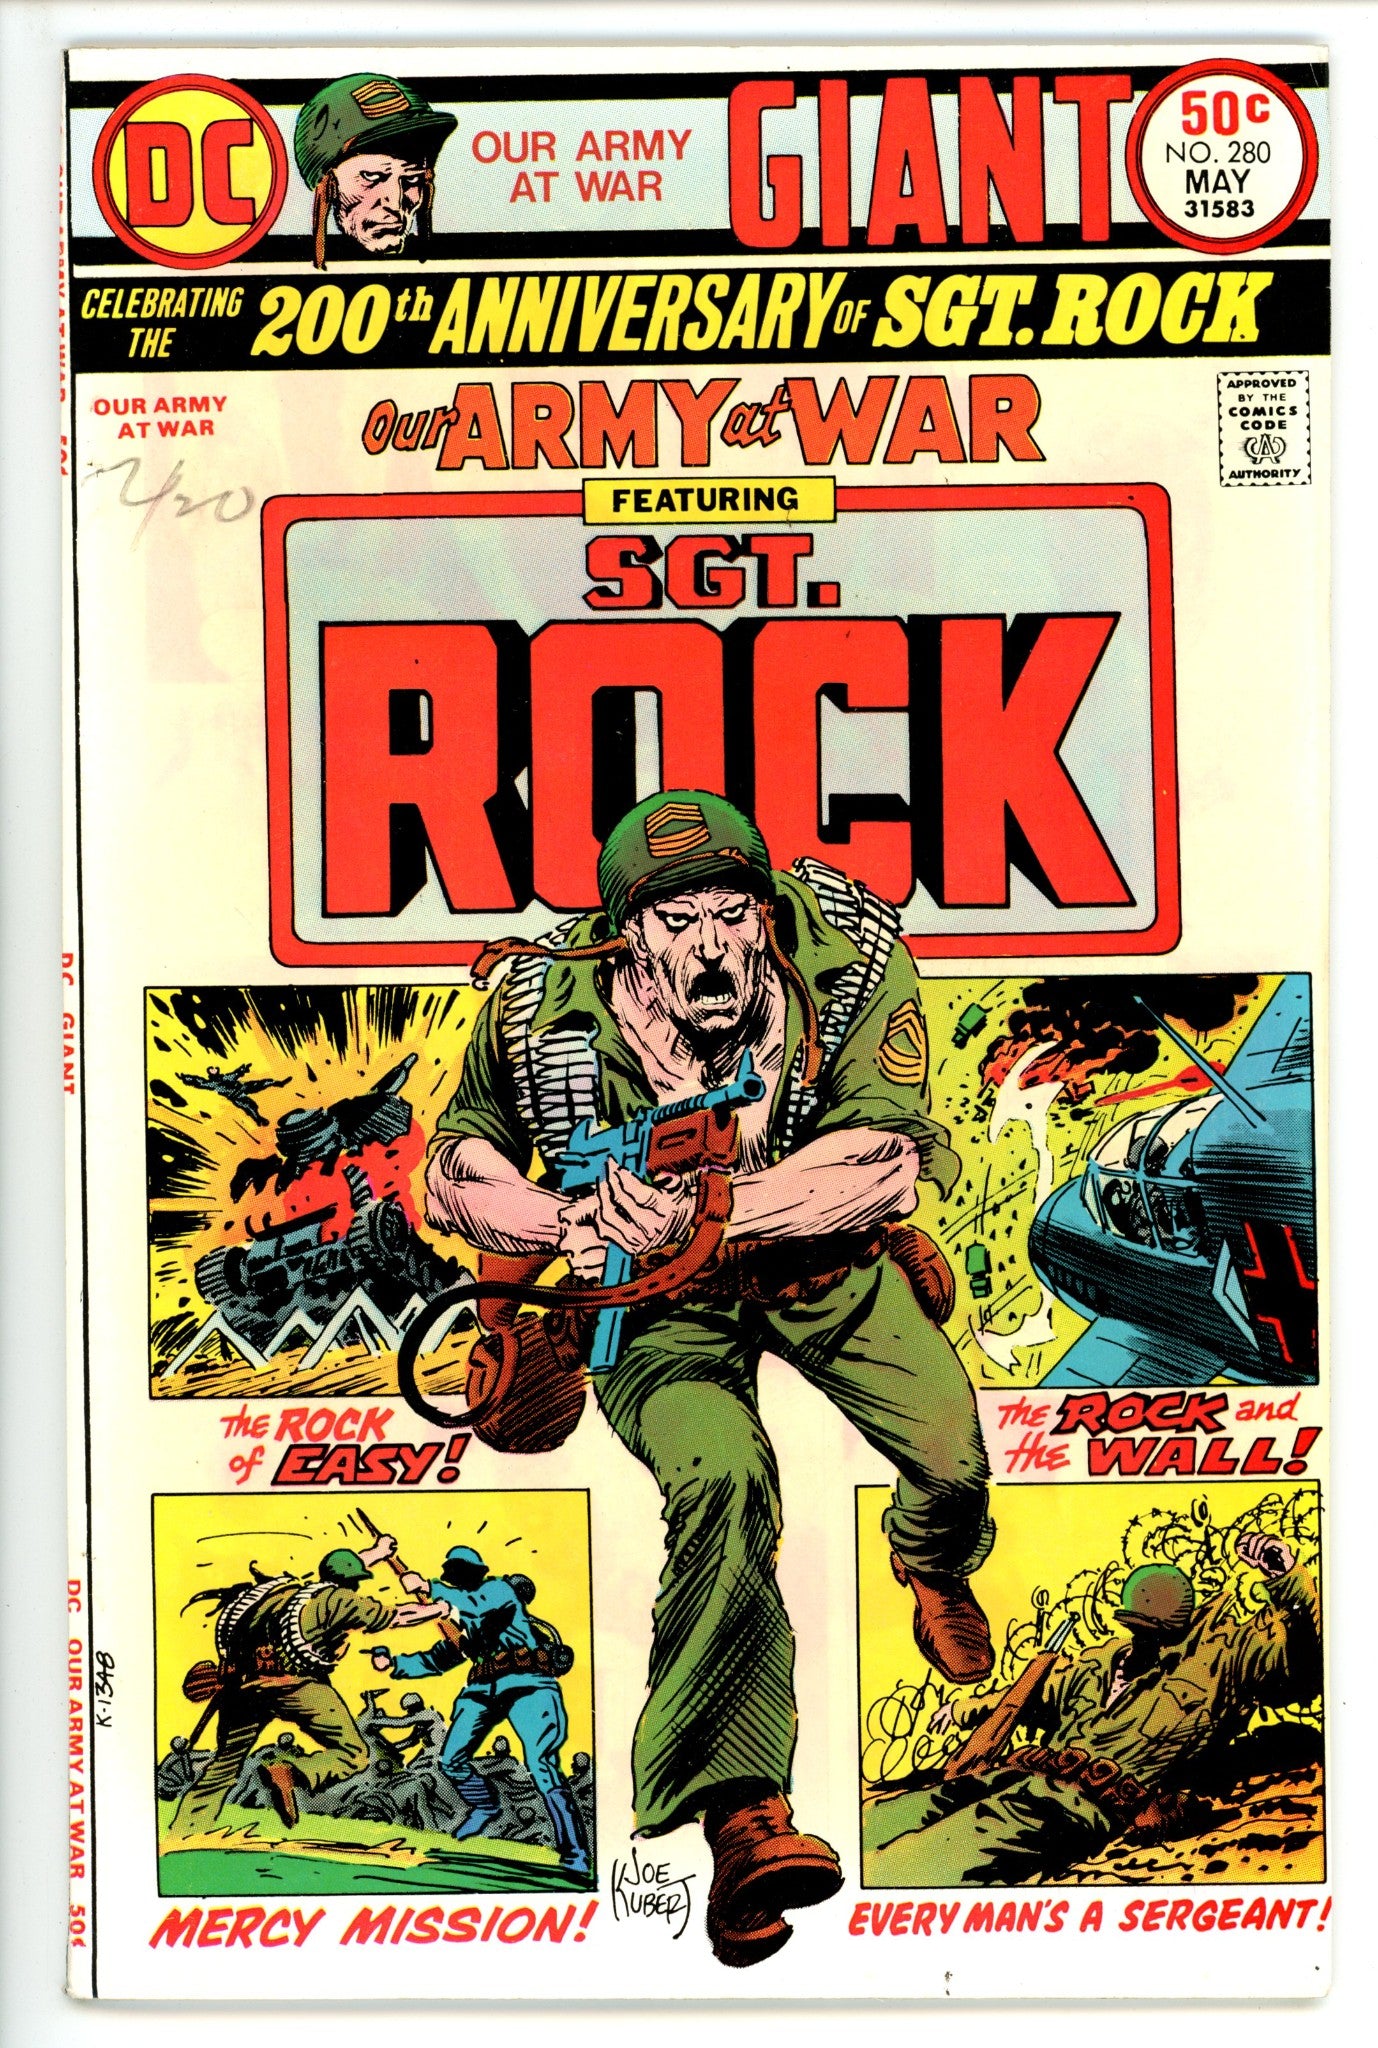 Our Army at War Vol 1 280 VF (8.0) (1975) 